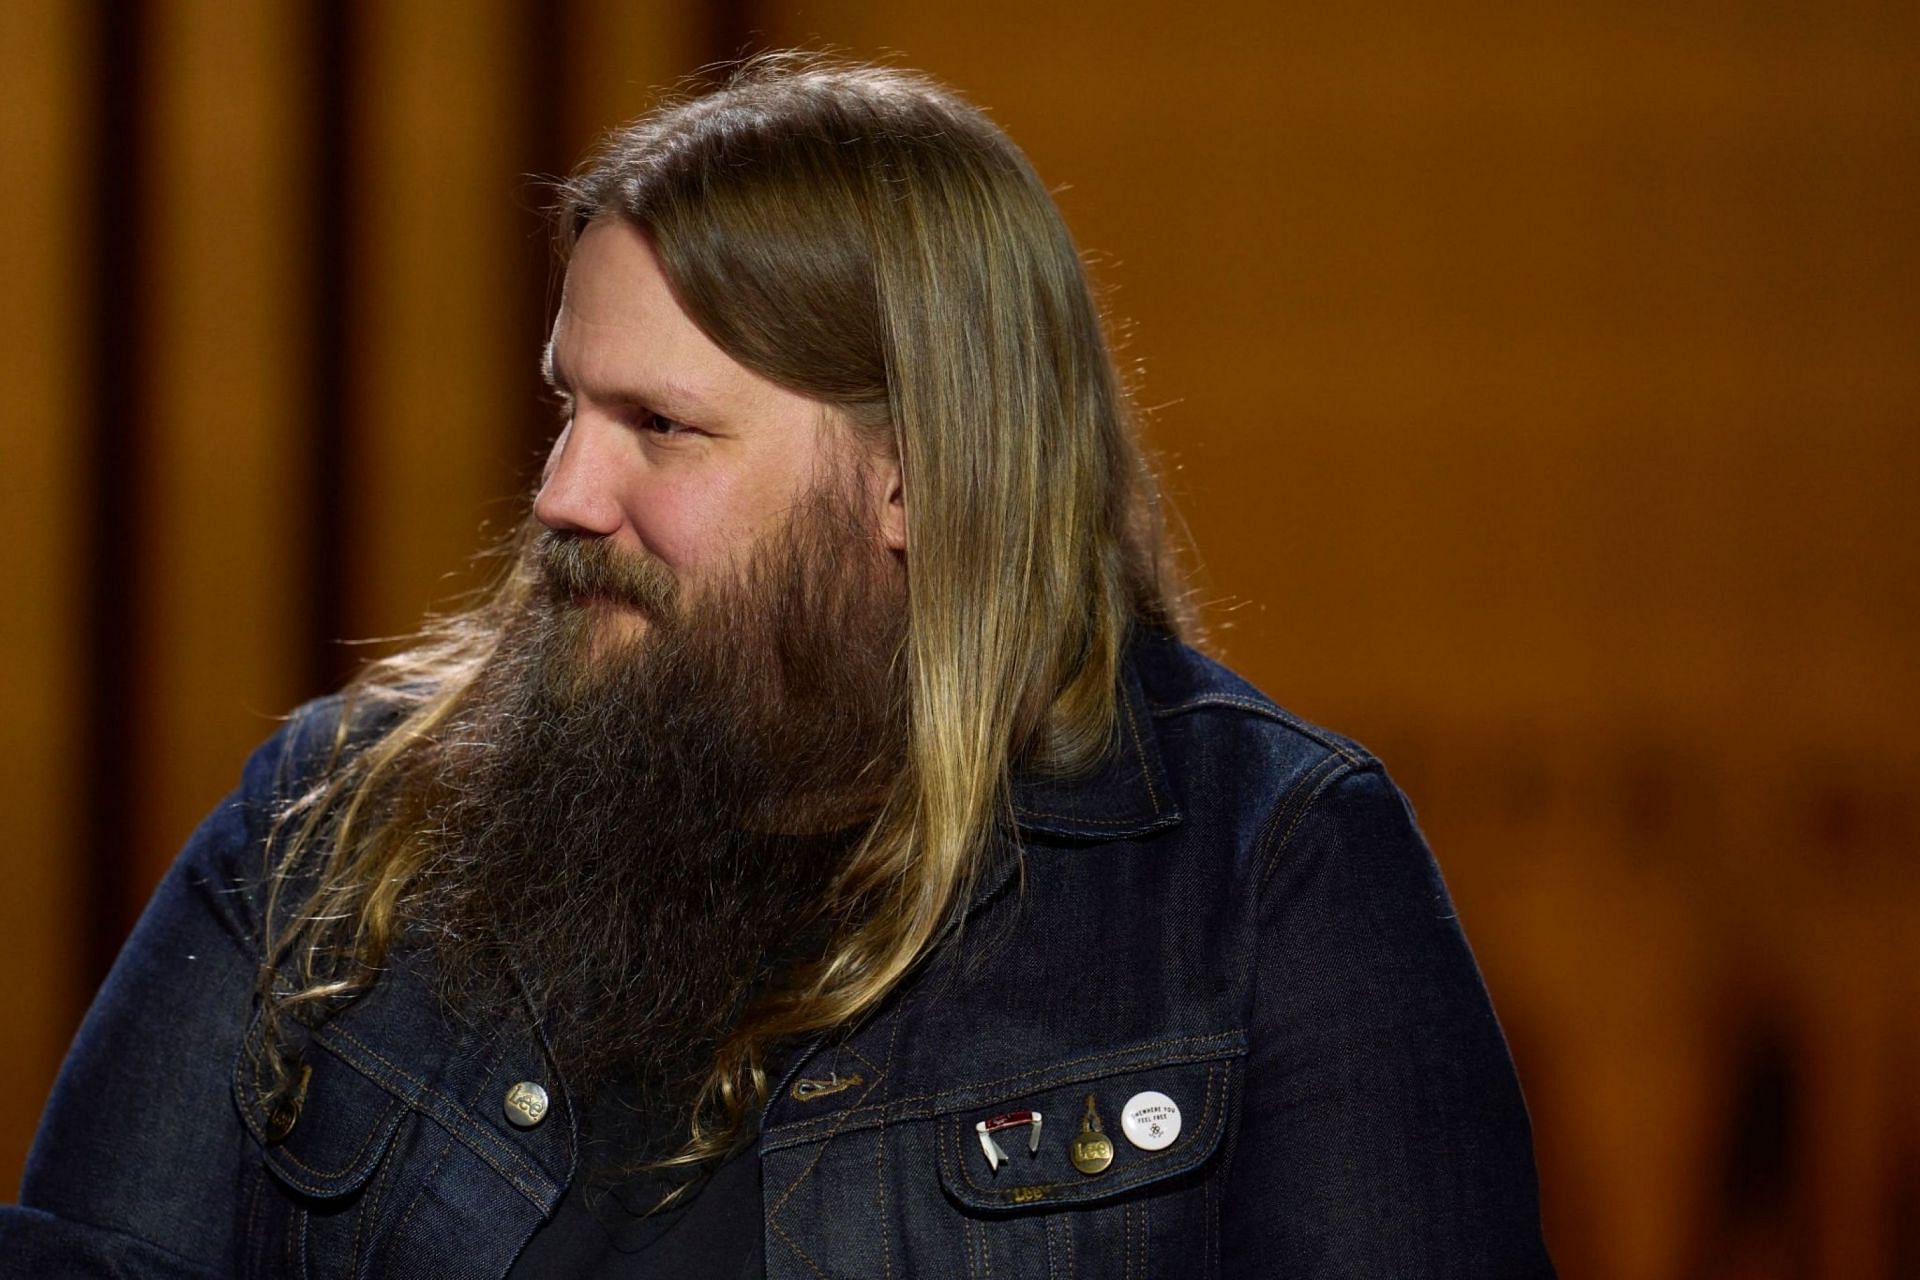 Chris Stapleton speaks during a press conference ahead of Super Bowl LVII at the Phoenix Convention Center on February 9, 2023 in Phoenix, Arizona (Image via Getty Image)